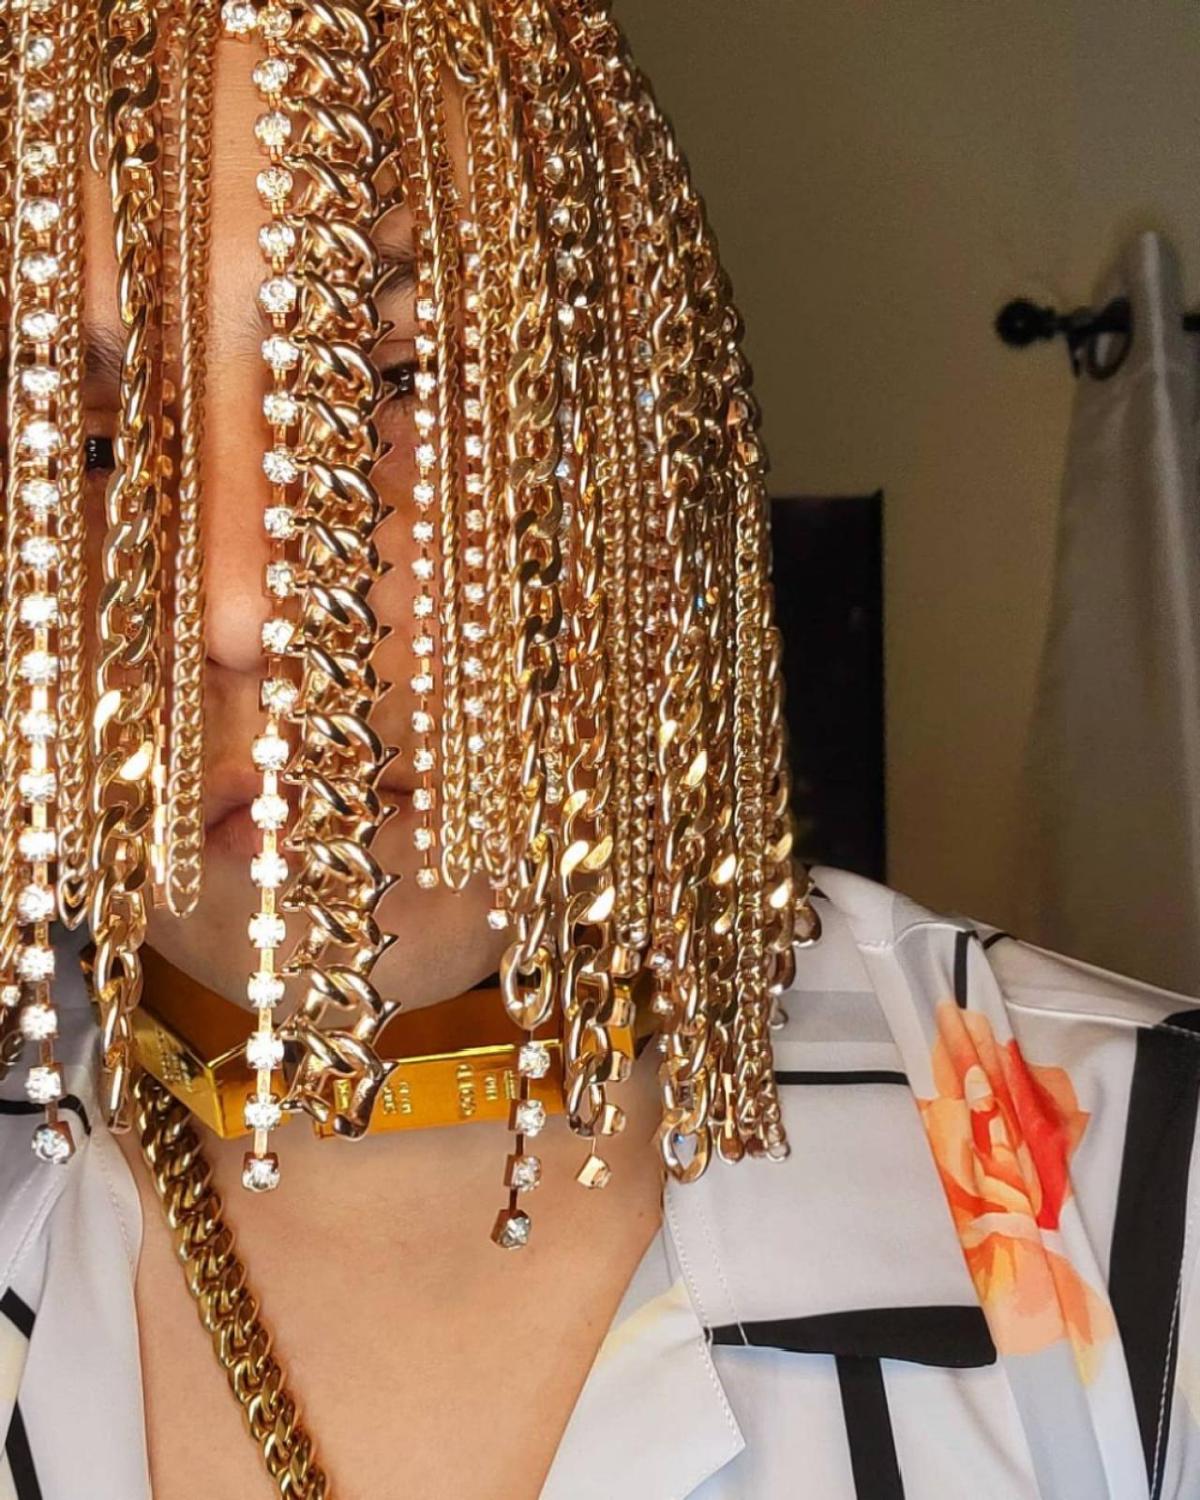 Rapper Got Gold Chains Surgically Implanted Into Head As 'hair'